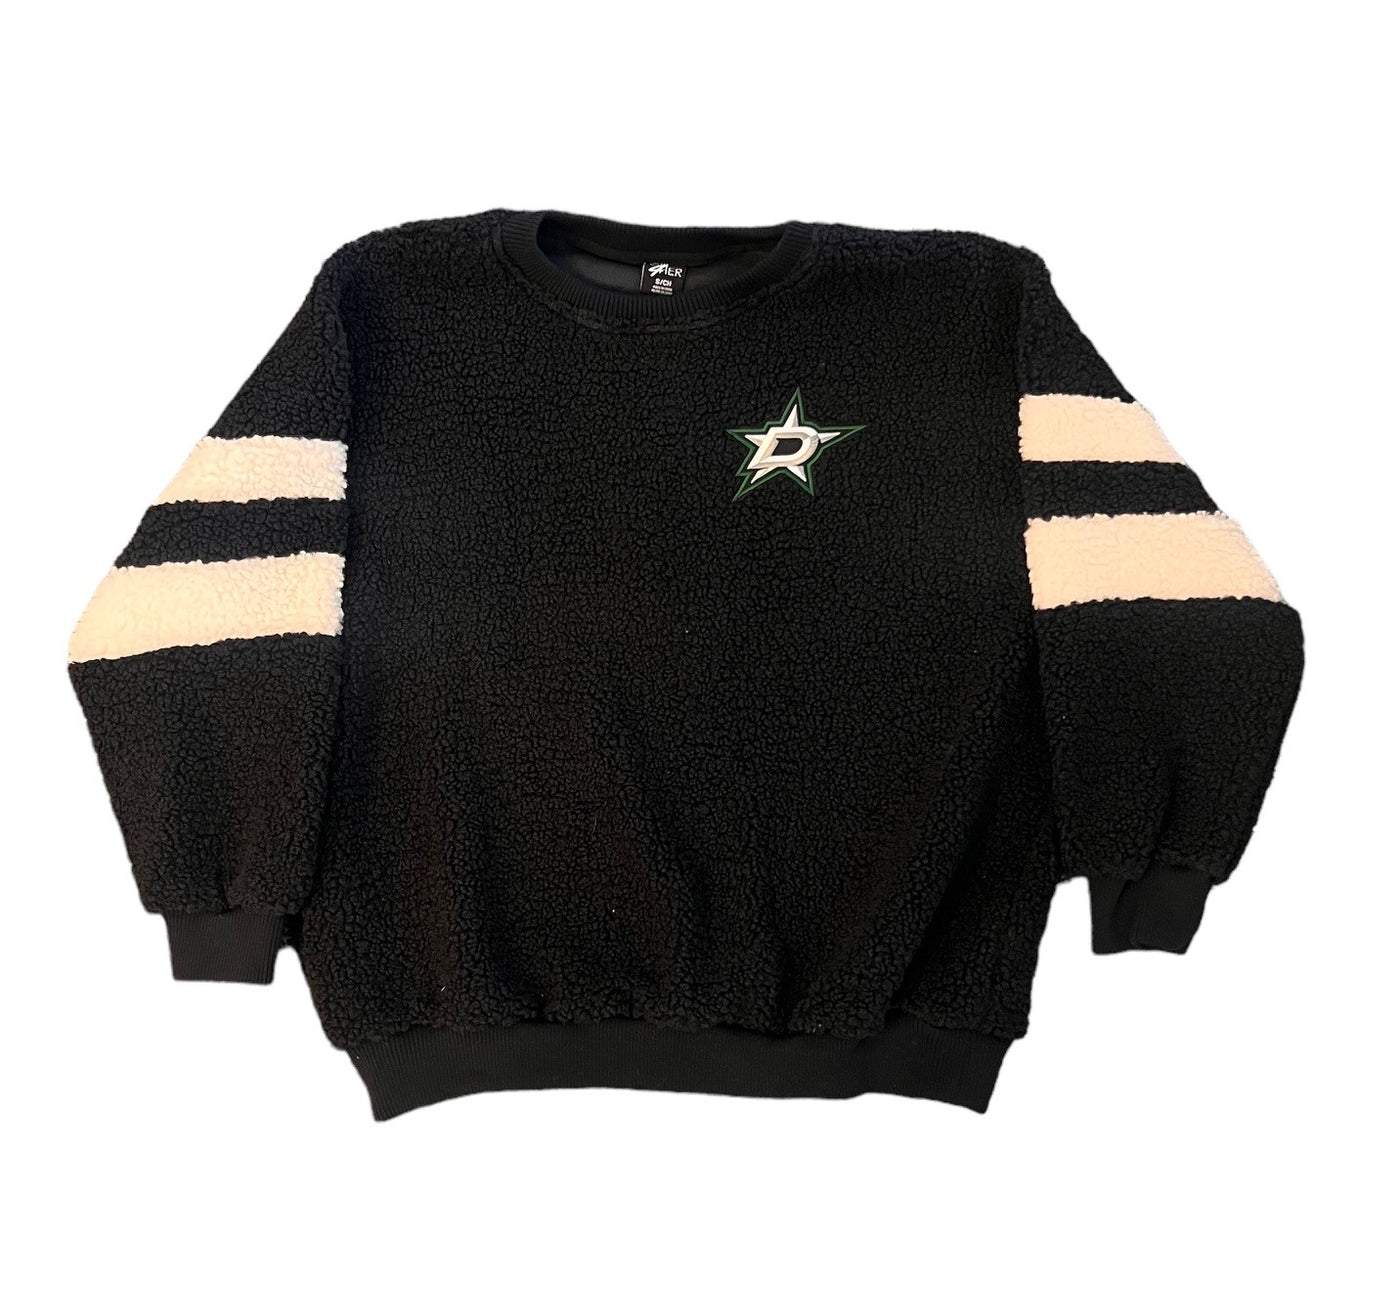 DALLAS STARS WOMEN'S G-III FOR HER SHERPA PULLOVER - FRONT VIEW